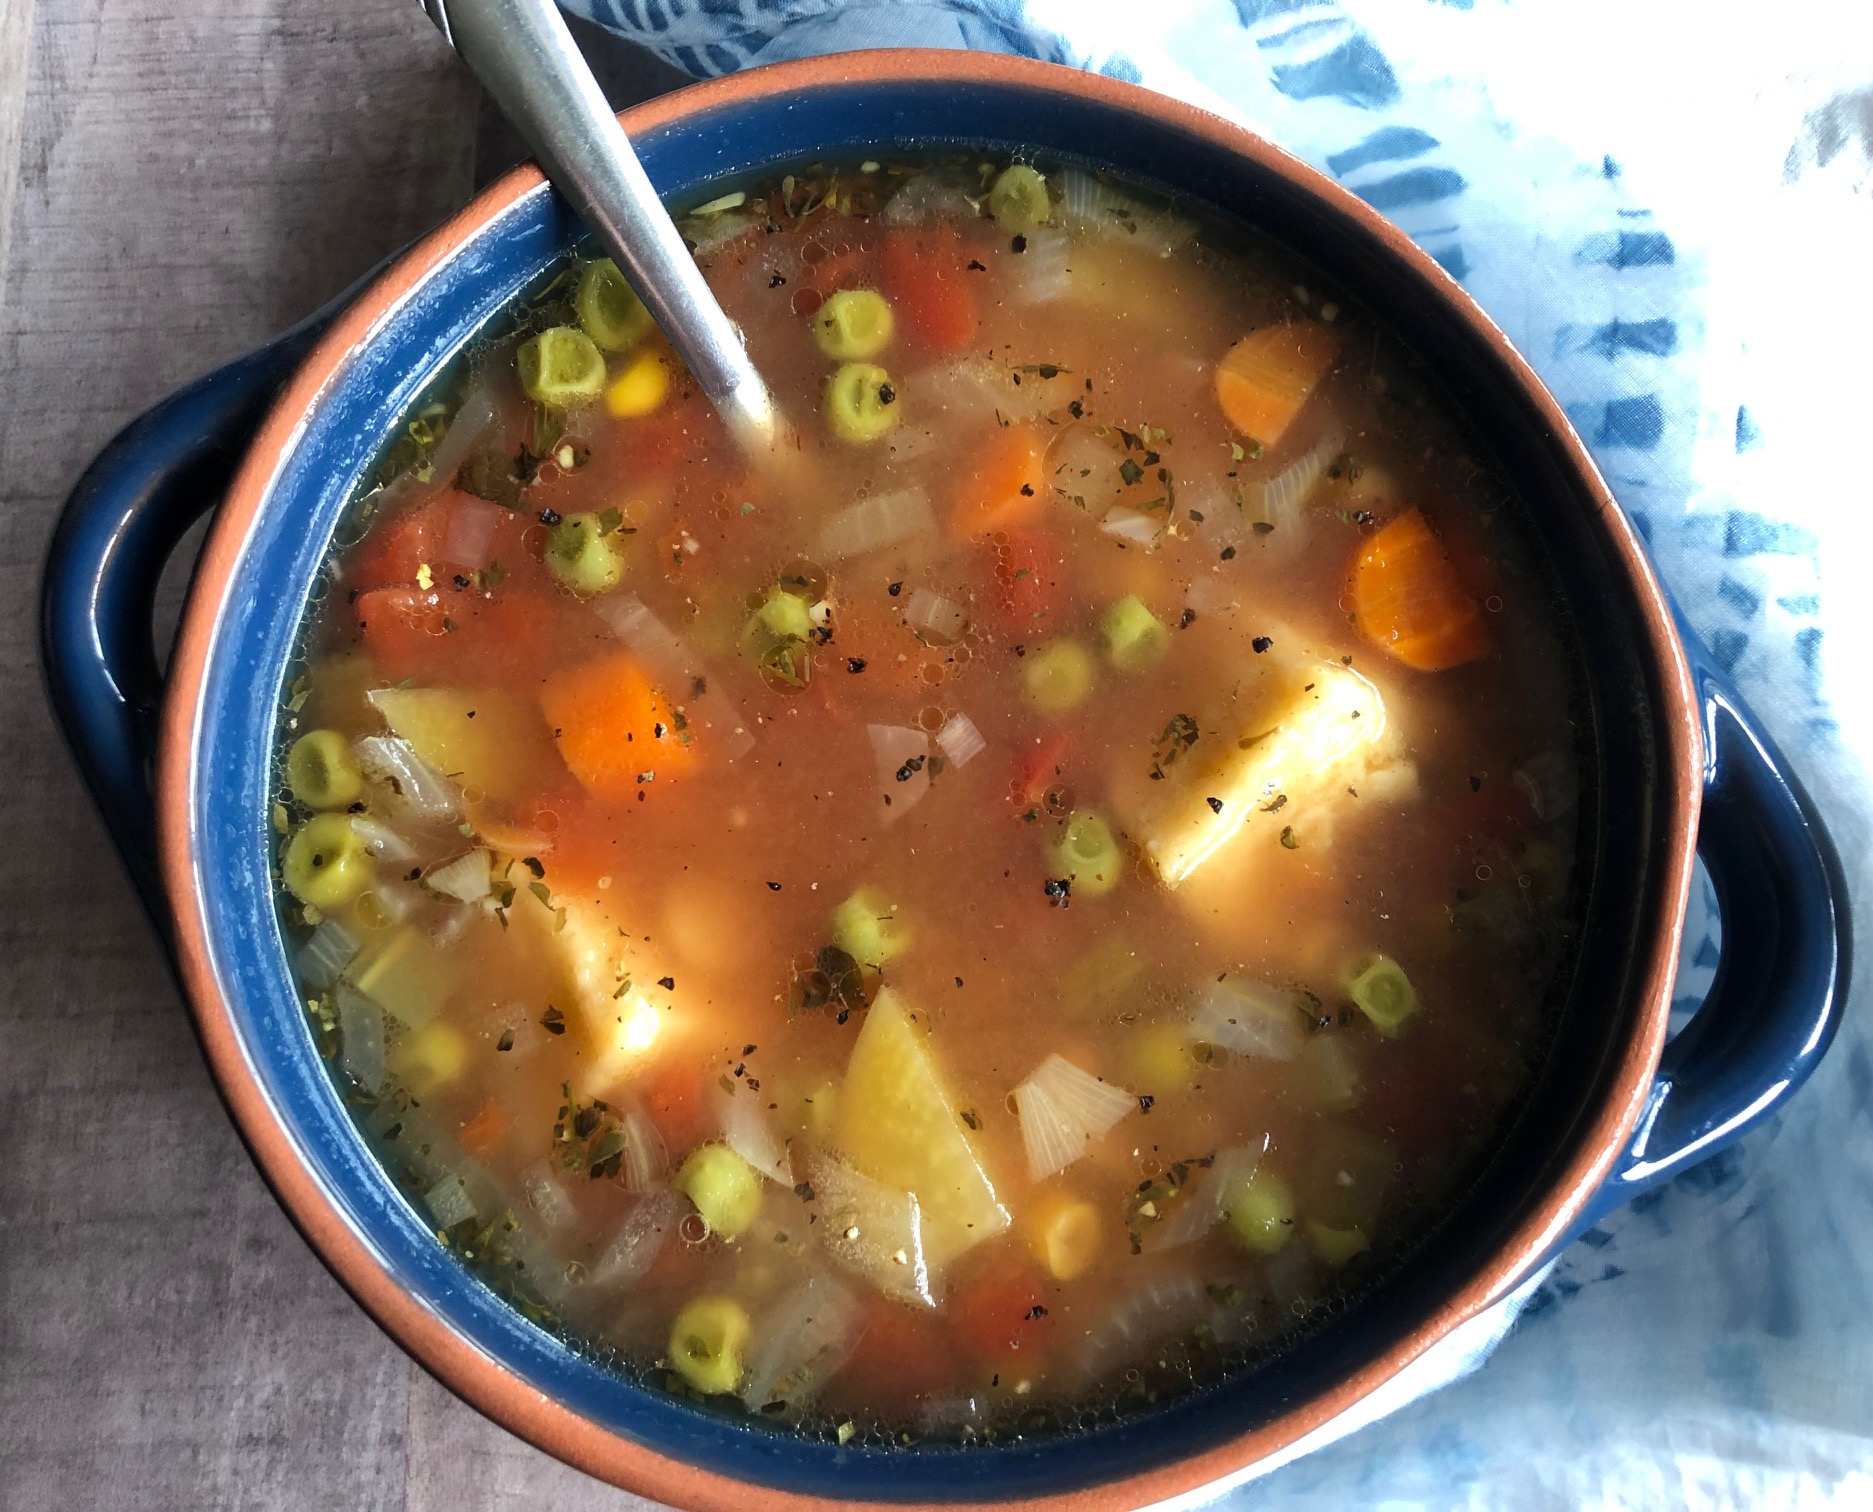 My Slow Cooker Vegetable Soup — The April Blake